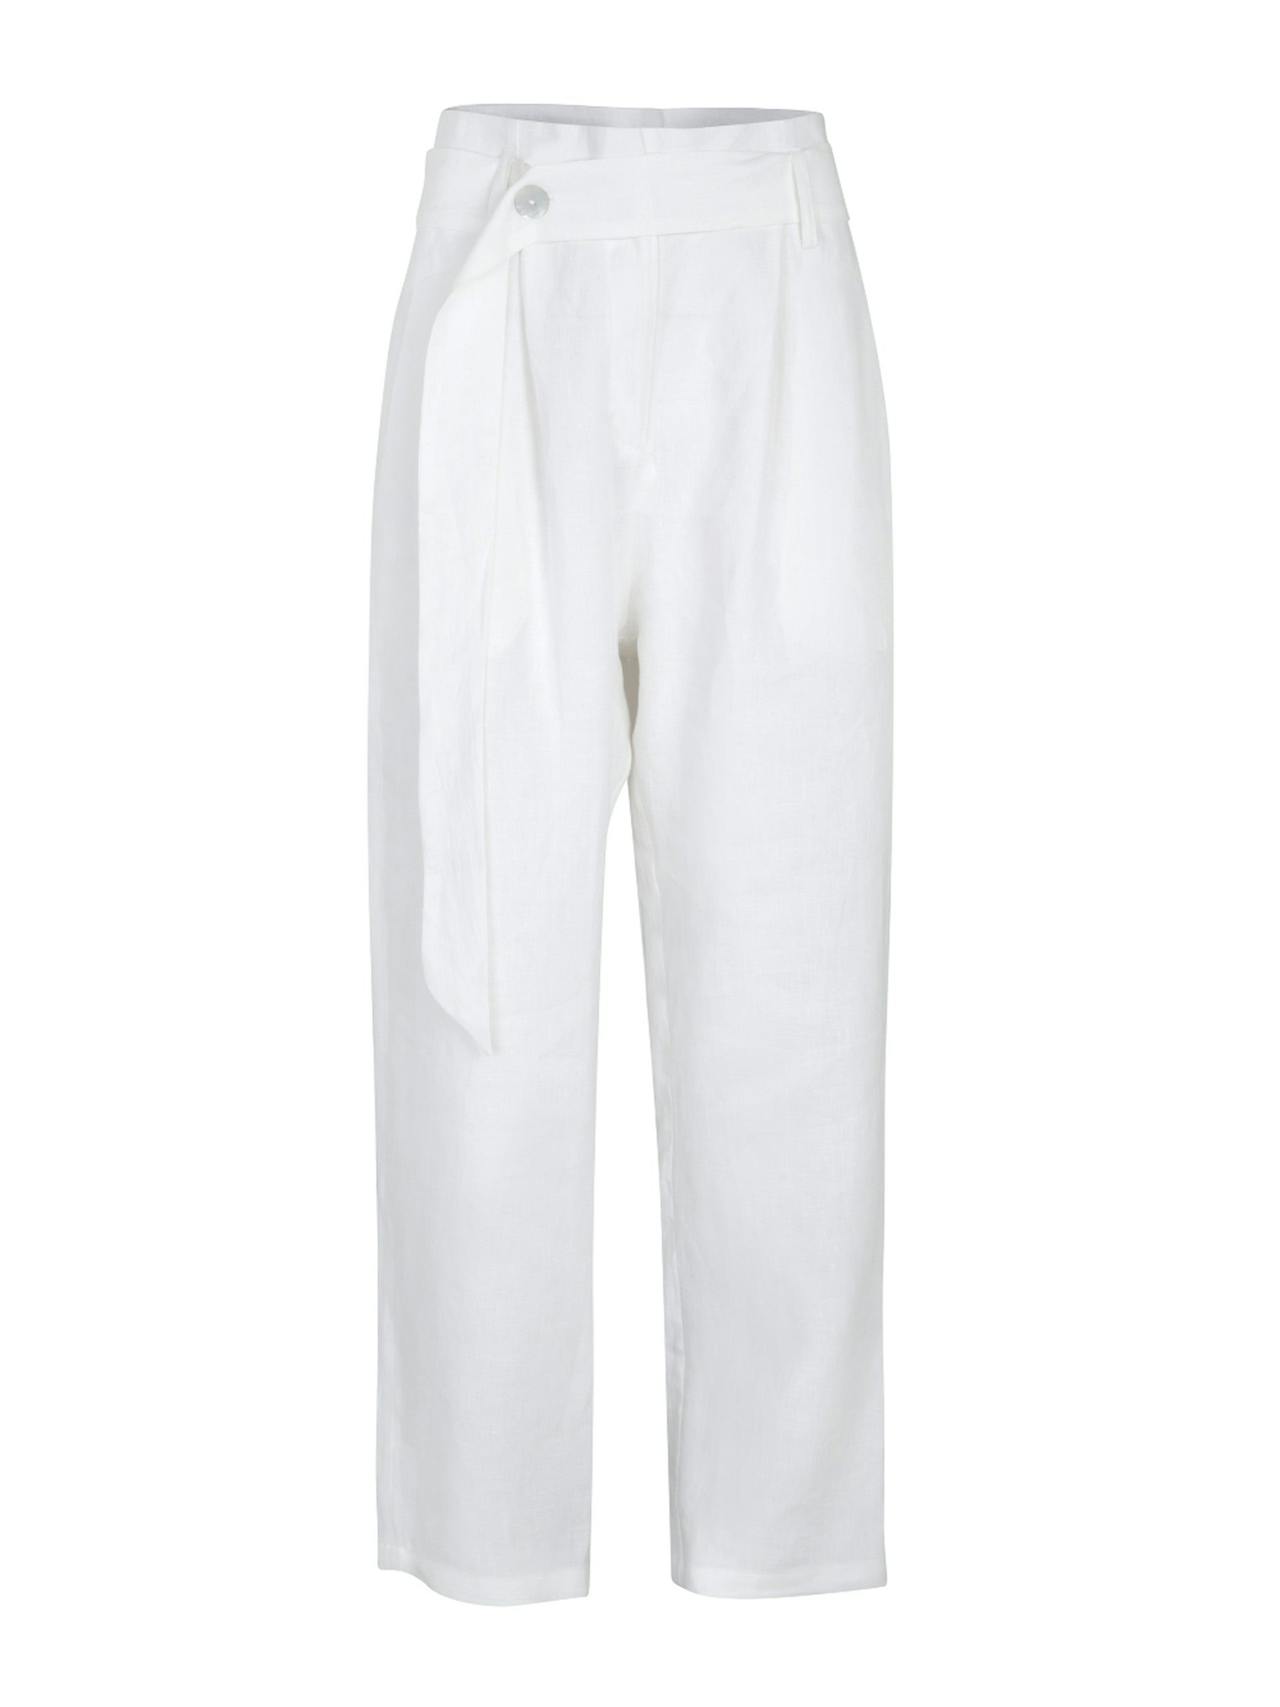 White Nomade suit trousers